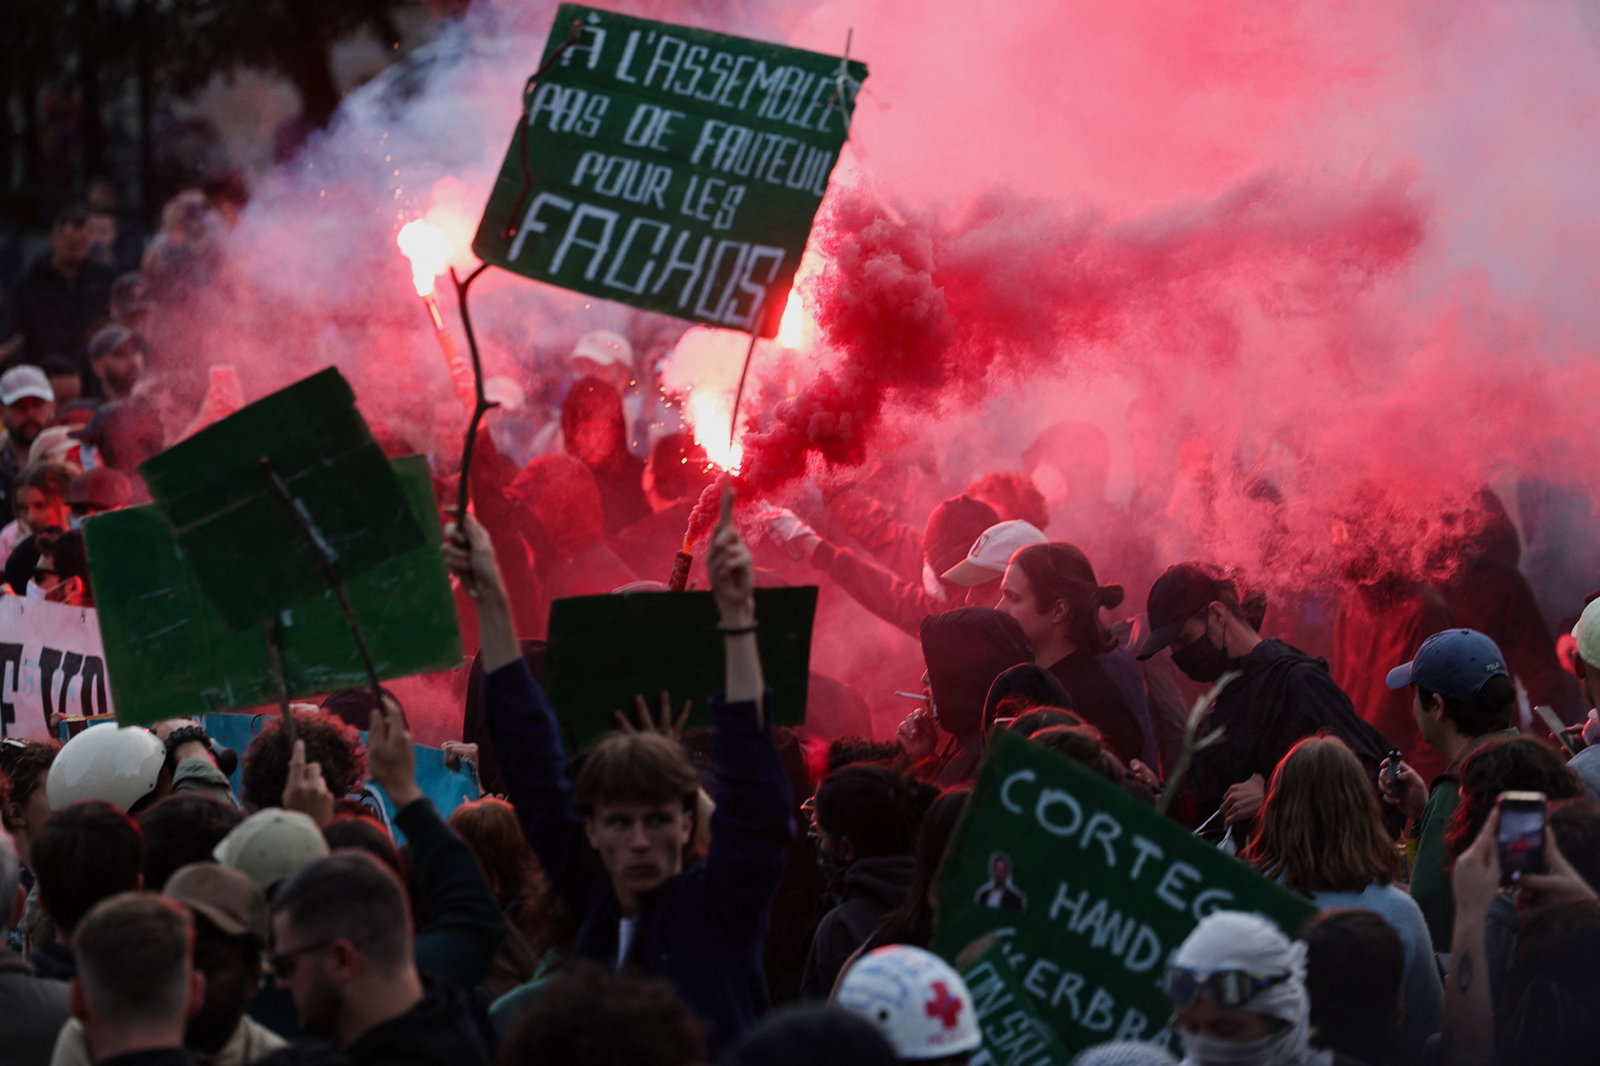 Red flares lit up amongst a crowd holding signs